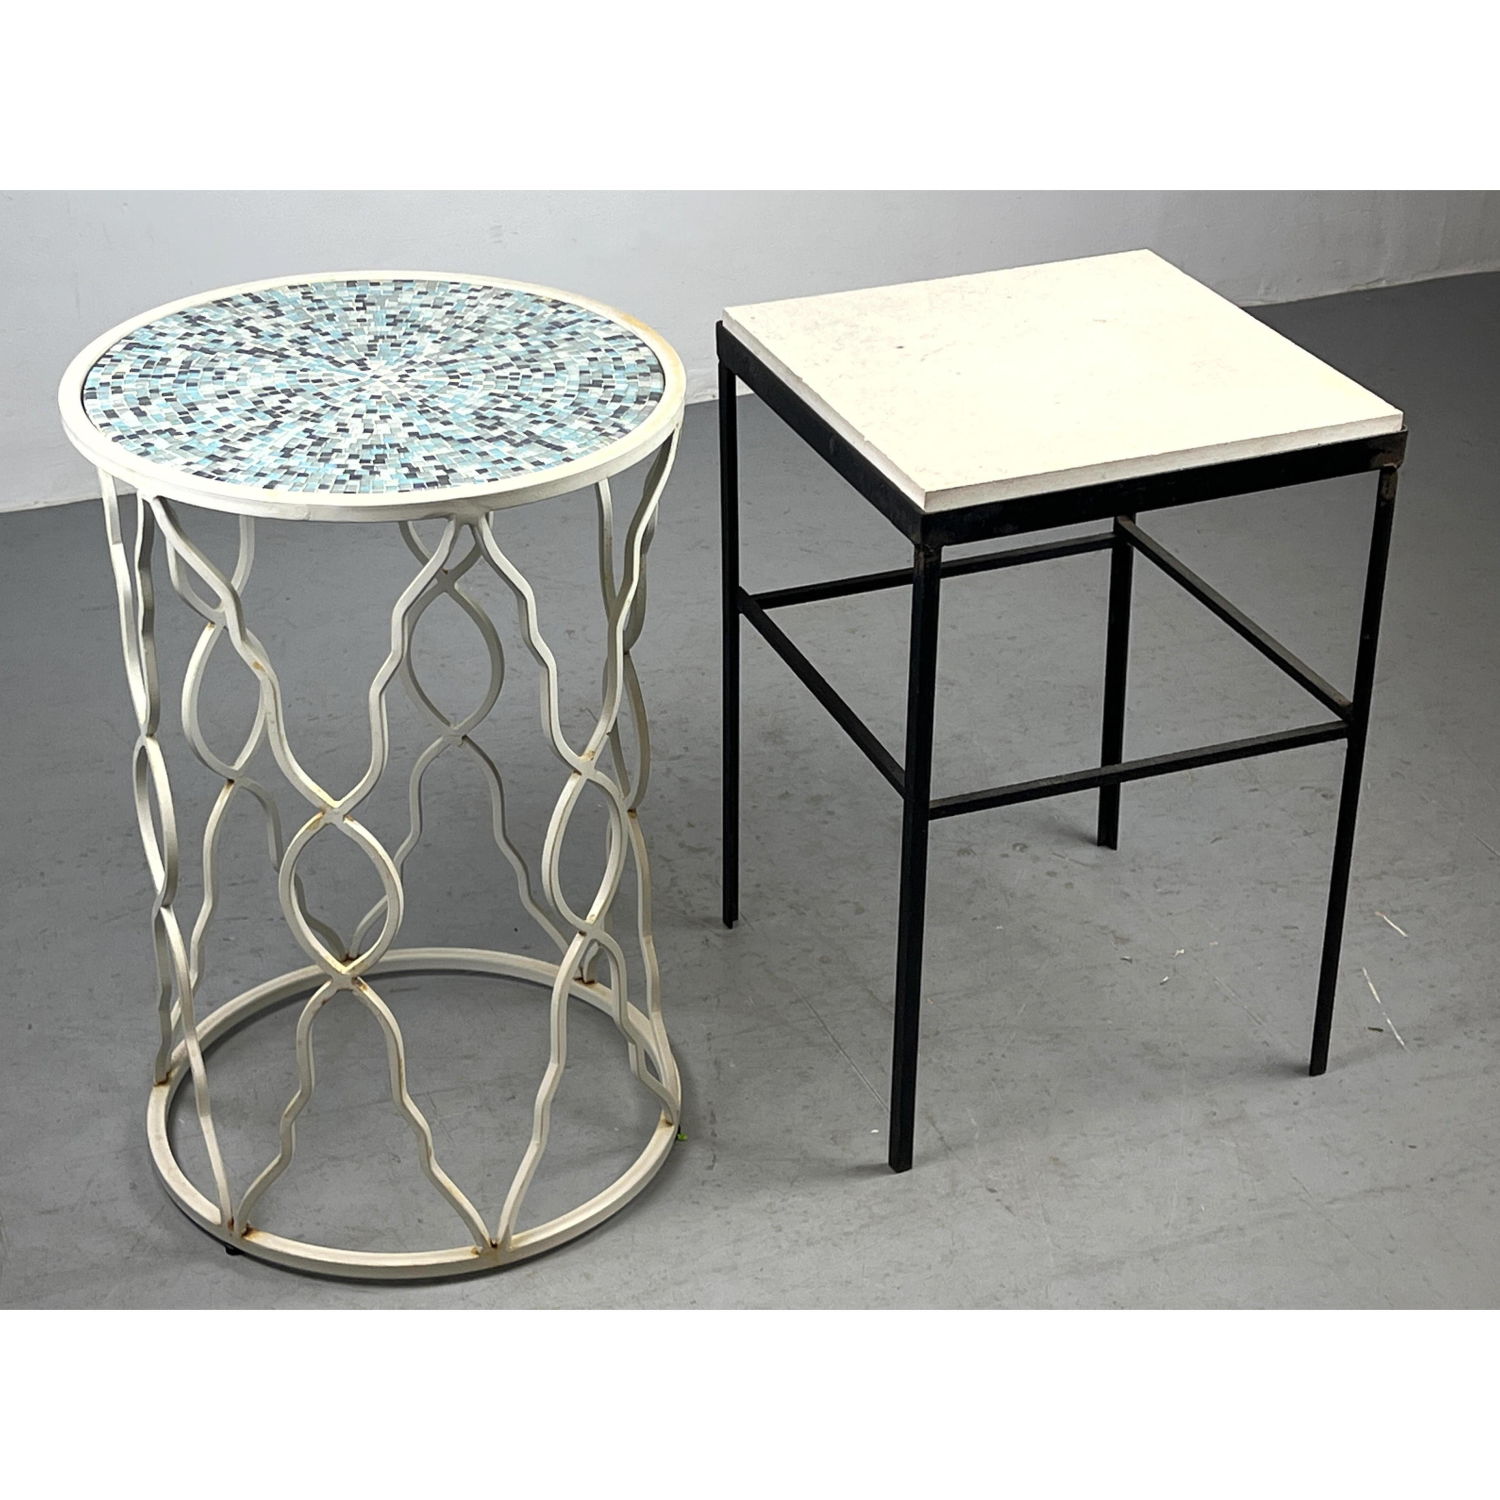 2pc Modern Side Tables Round Table 2ff11f